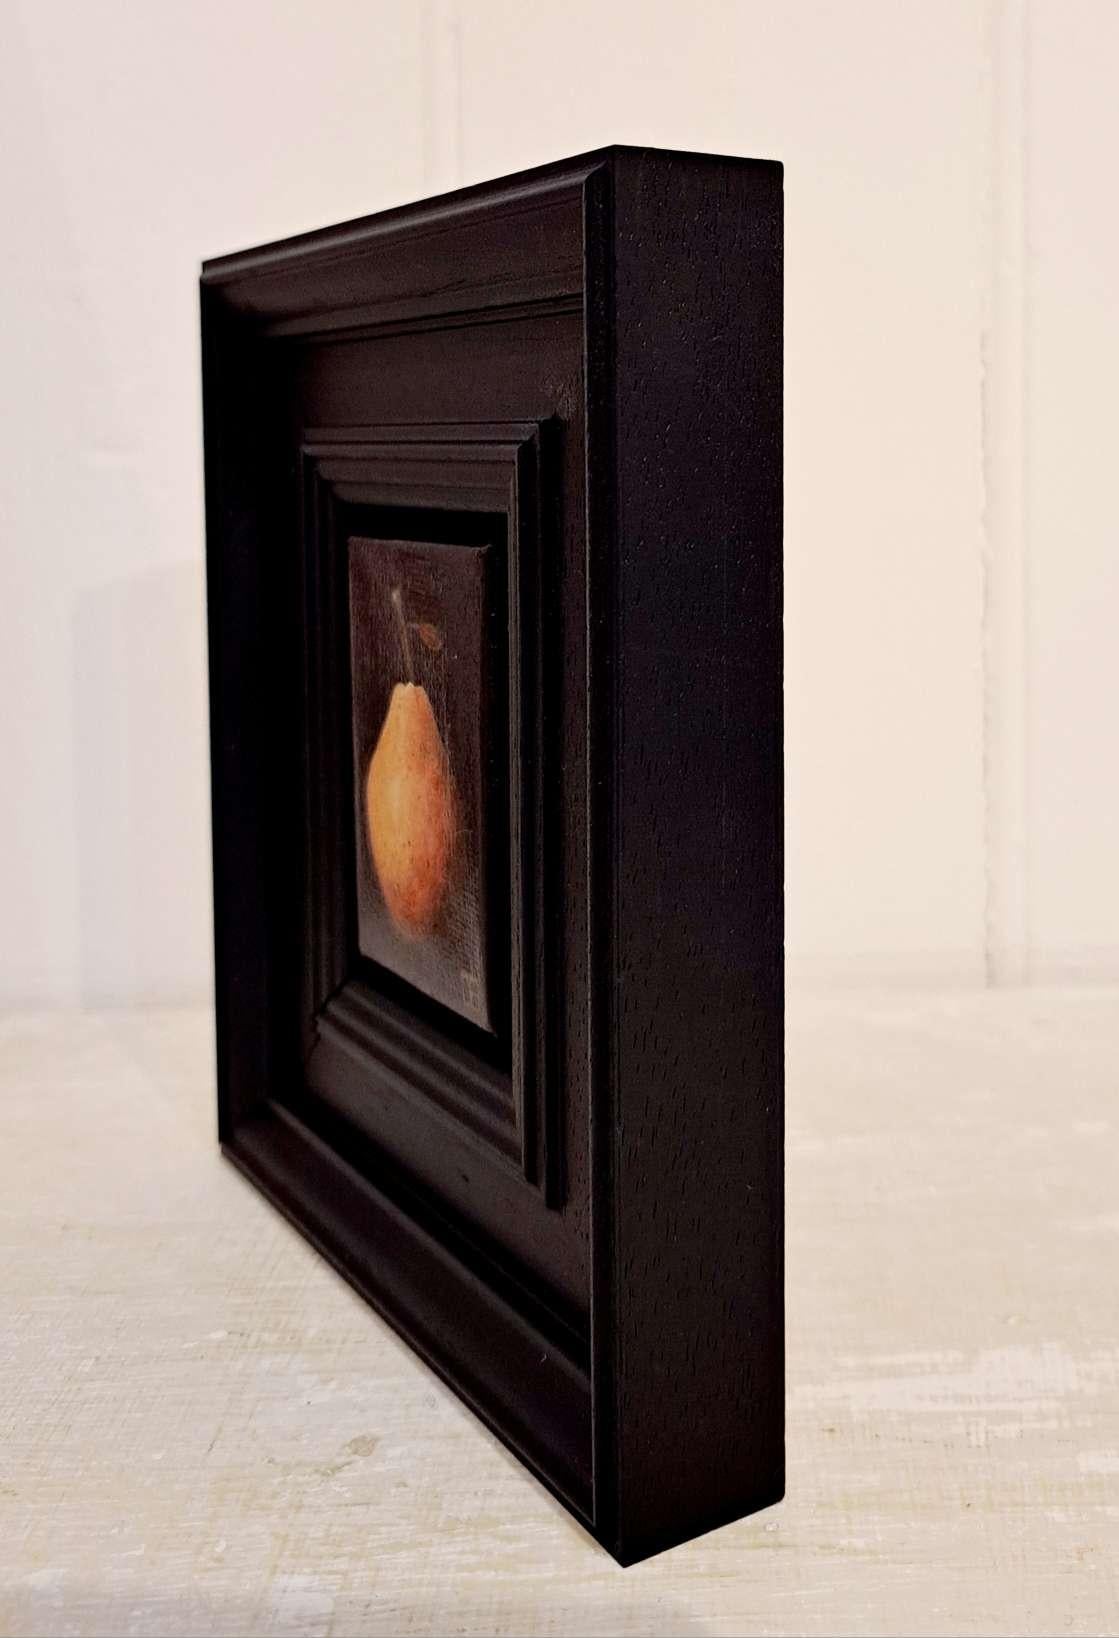 Pocket Blush Pear is an original oil painting by Dani Humberstone as part of her Pocket Painting series featuring small scale realistic oil paintings, with a nod to baroque still life painting. The paitings are set in a black wood layered